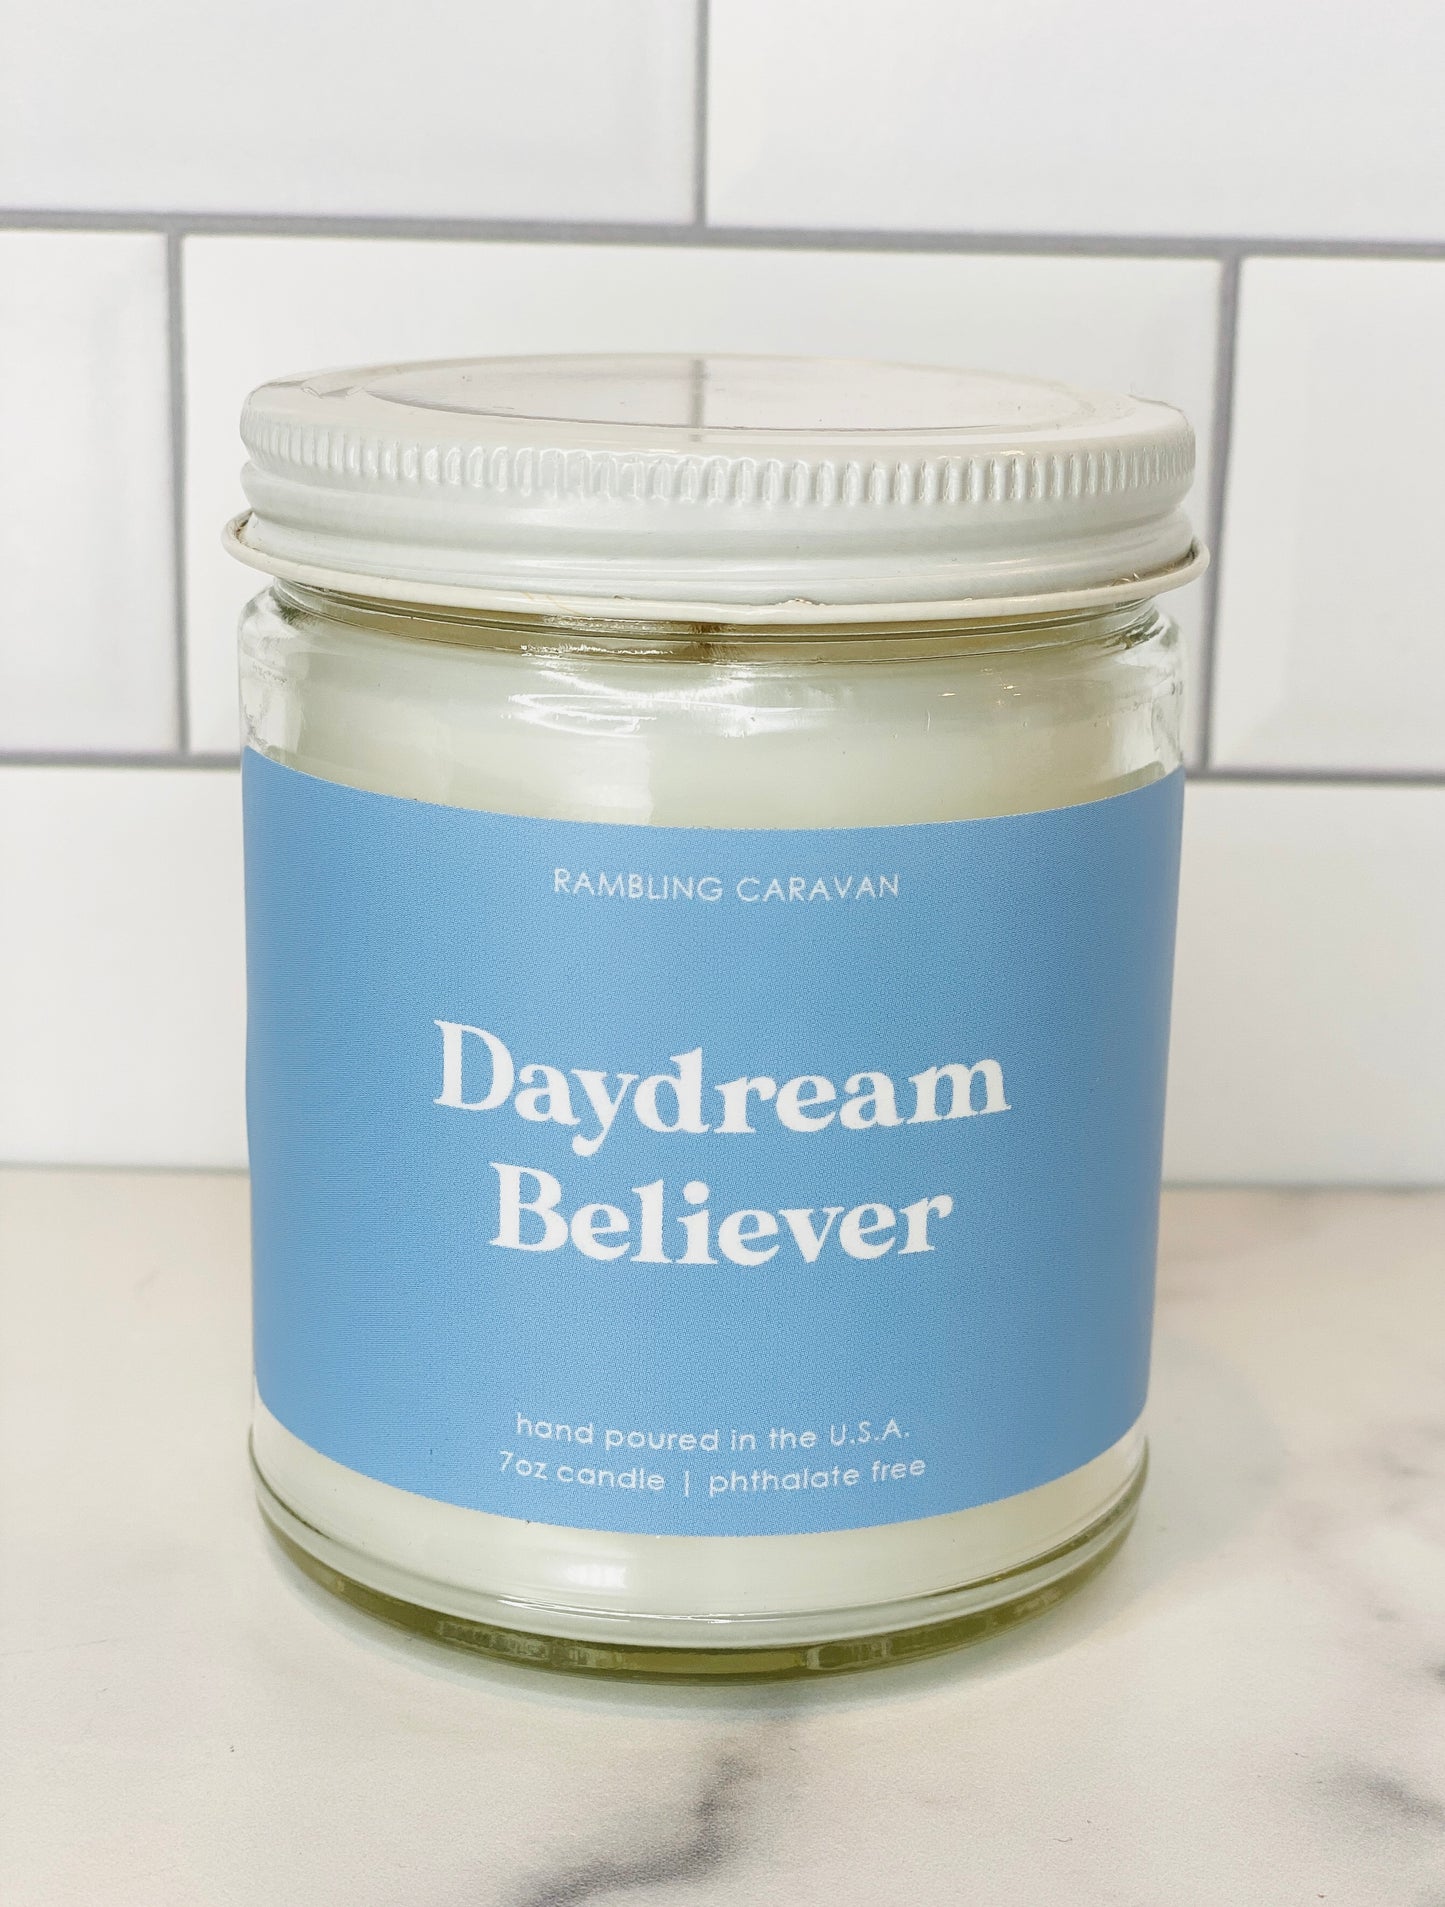 Daydream Believer Candle